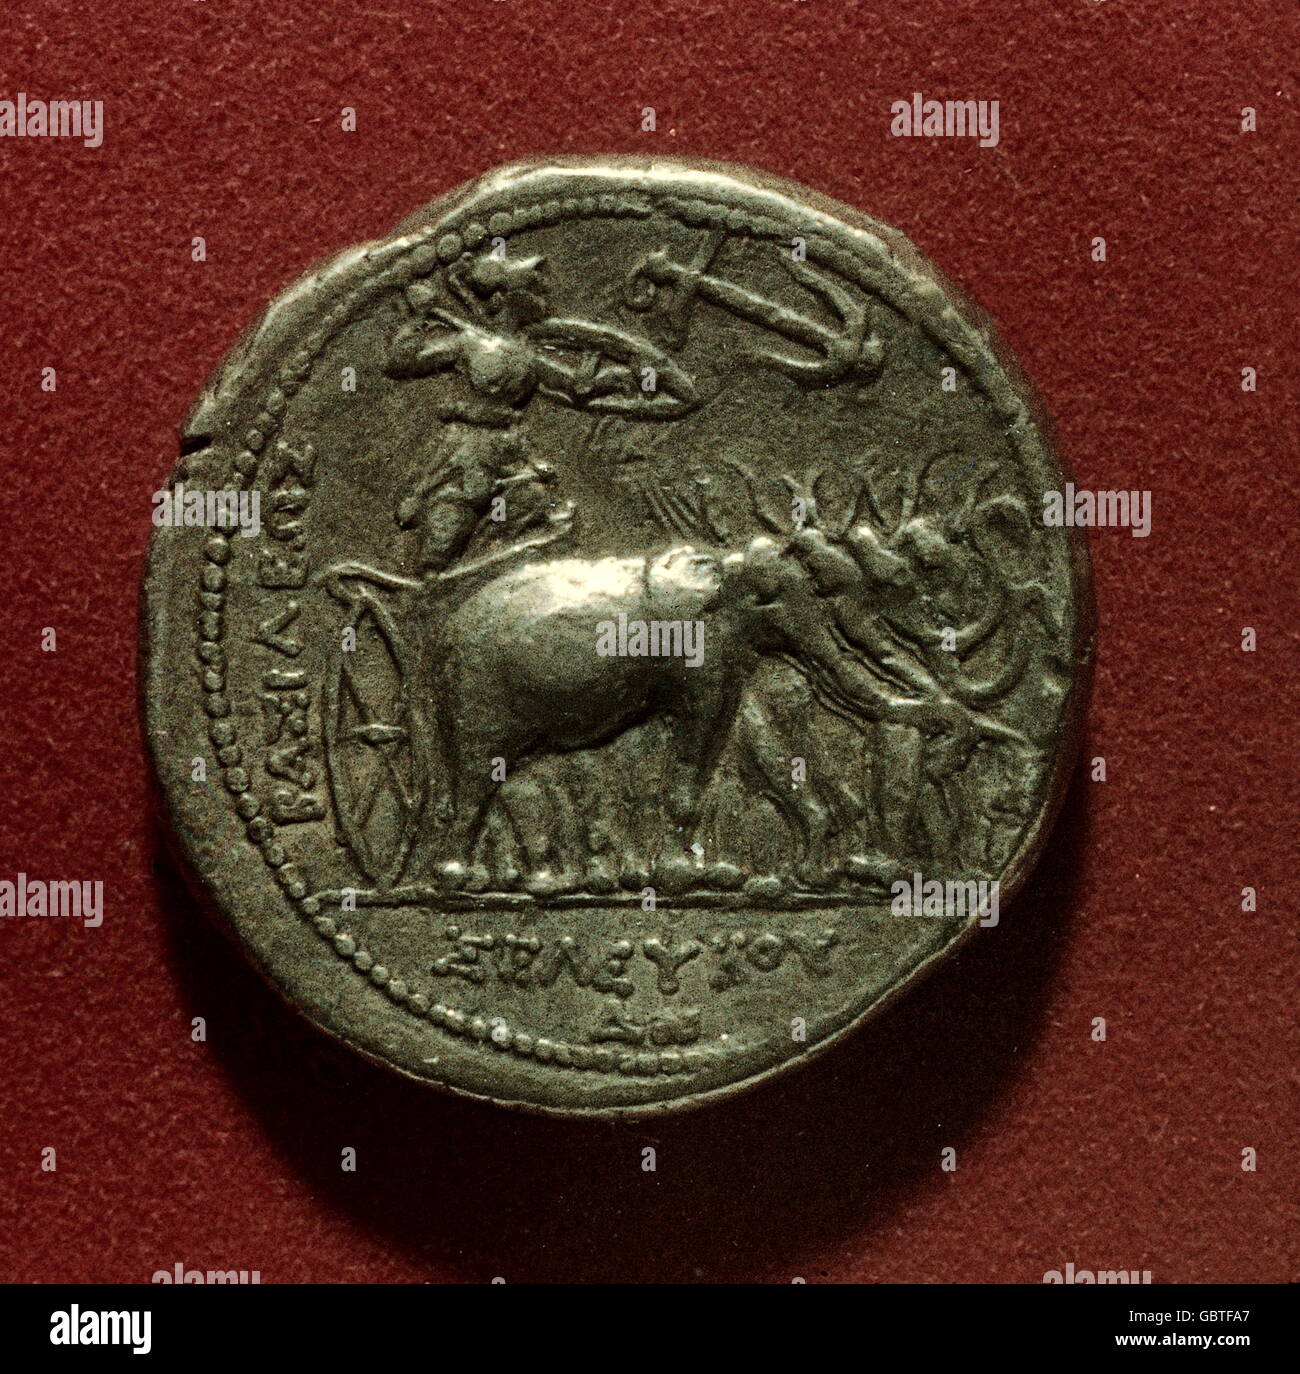 money / finance, coins, ancient world, drachma of King Seleucus I Nicator of Babylon and Syria, circa 200 BC, historic, historical, chariot, Hellenistic period, war elephant, warrior, Seleucia Empire, silver coin, Seleucids, numismatics, ancient world, people, Additional-Rights-Clearences-Not Available Stock Photo